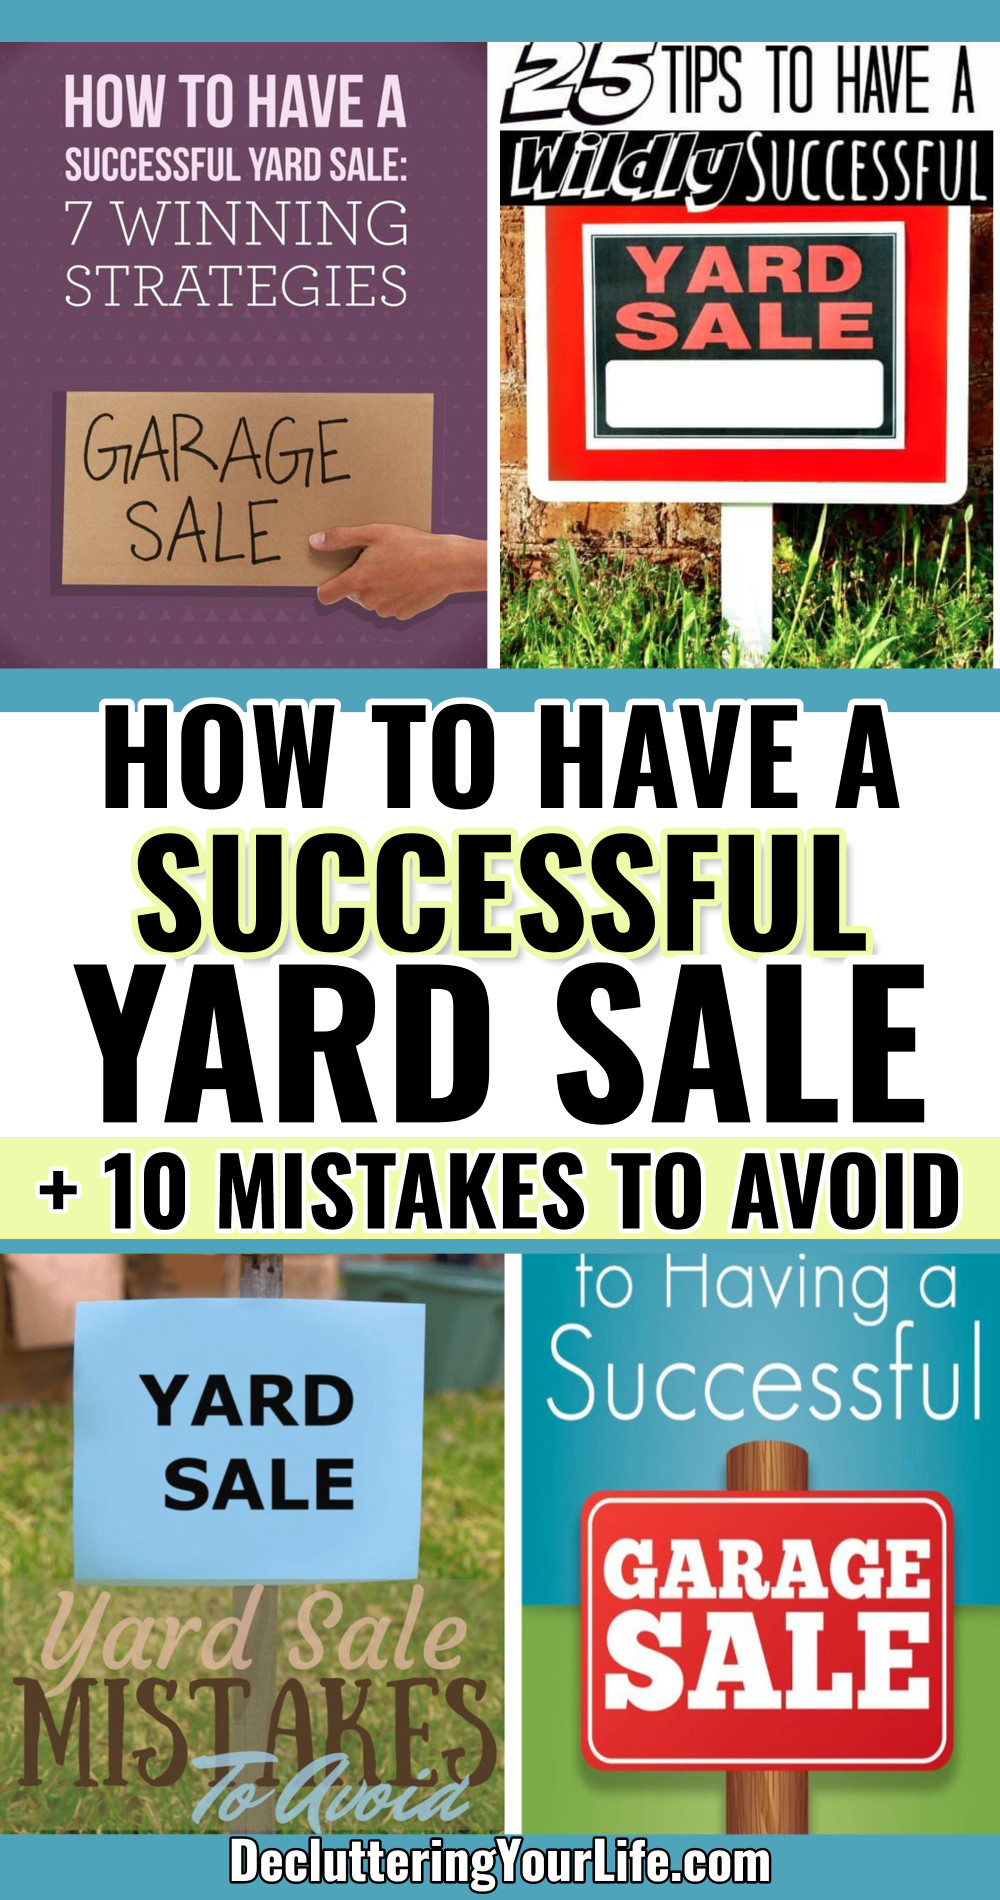 tips to have a successful yard sale